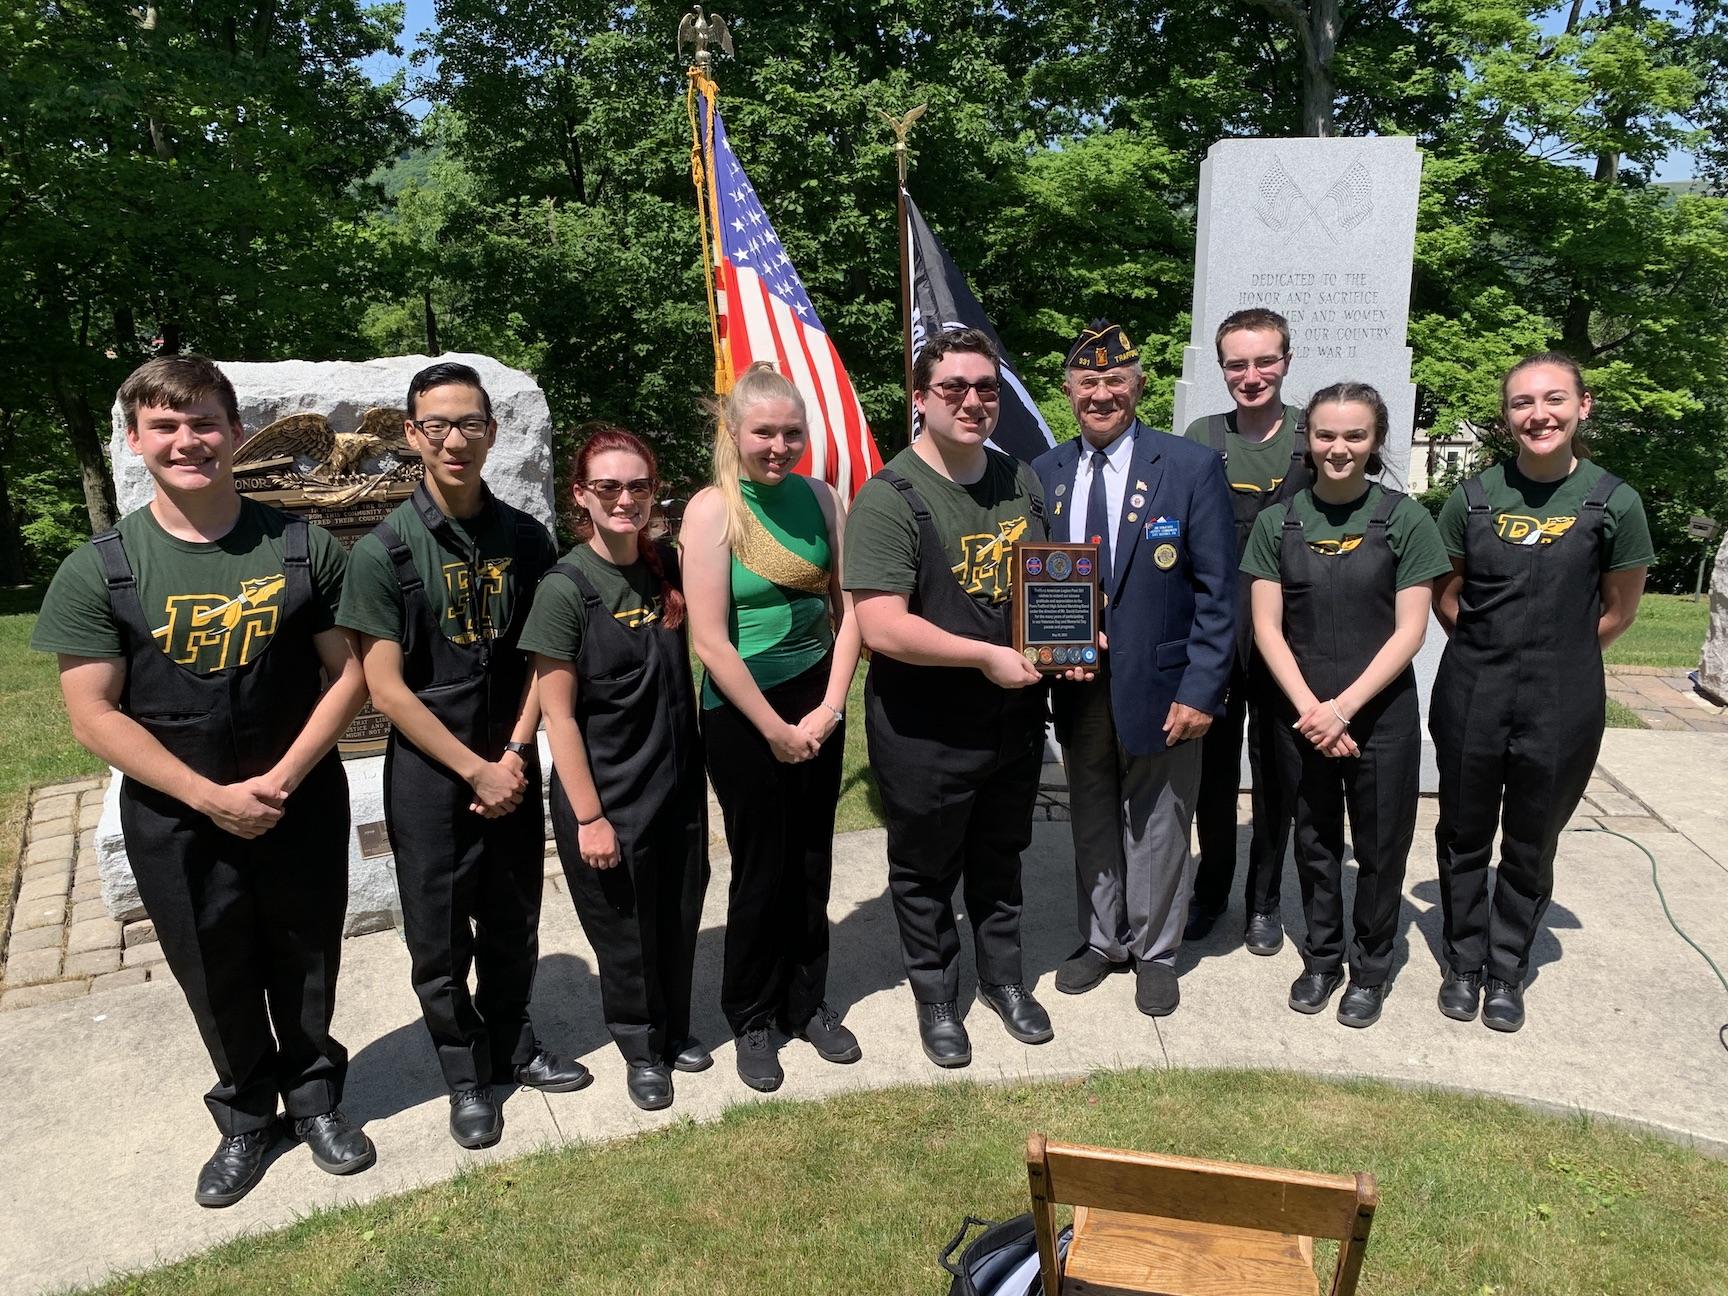 American Legion Post 331 commander, Jim Drnjenich, presented a plaque to the graduates of the Penn-Trafford Marching Band in appreciation for many years of participation